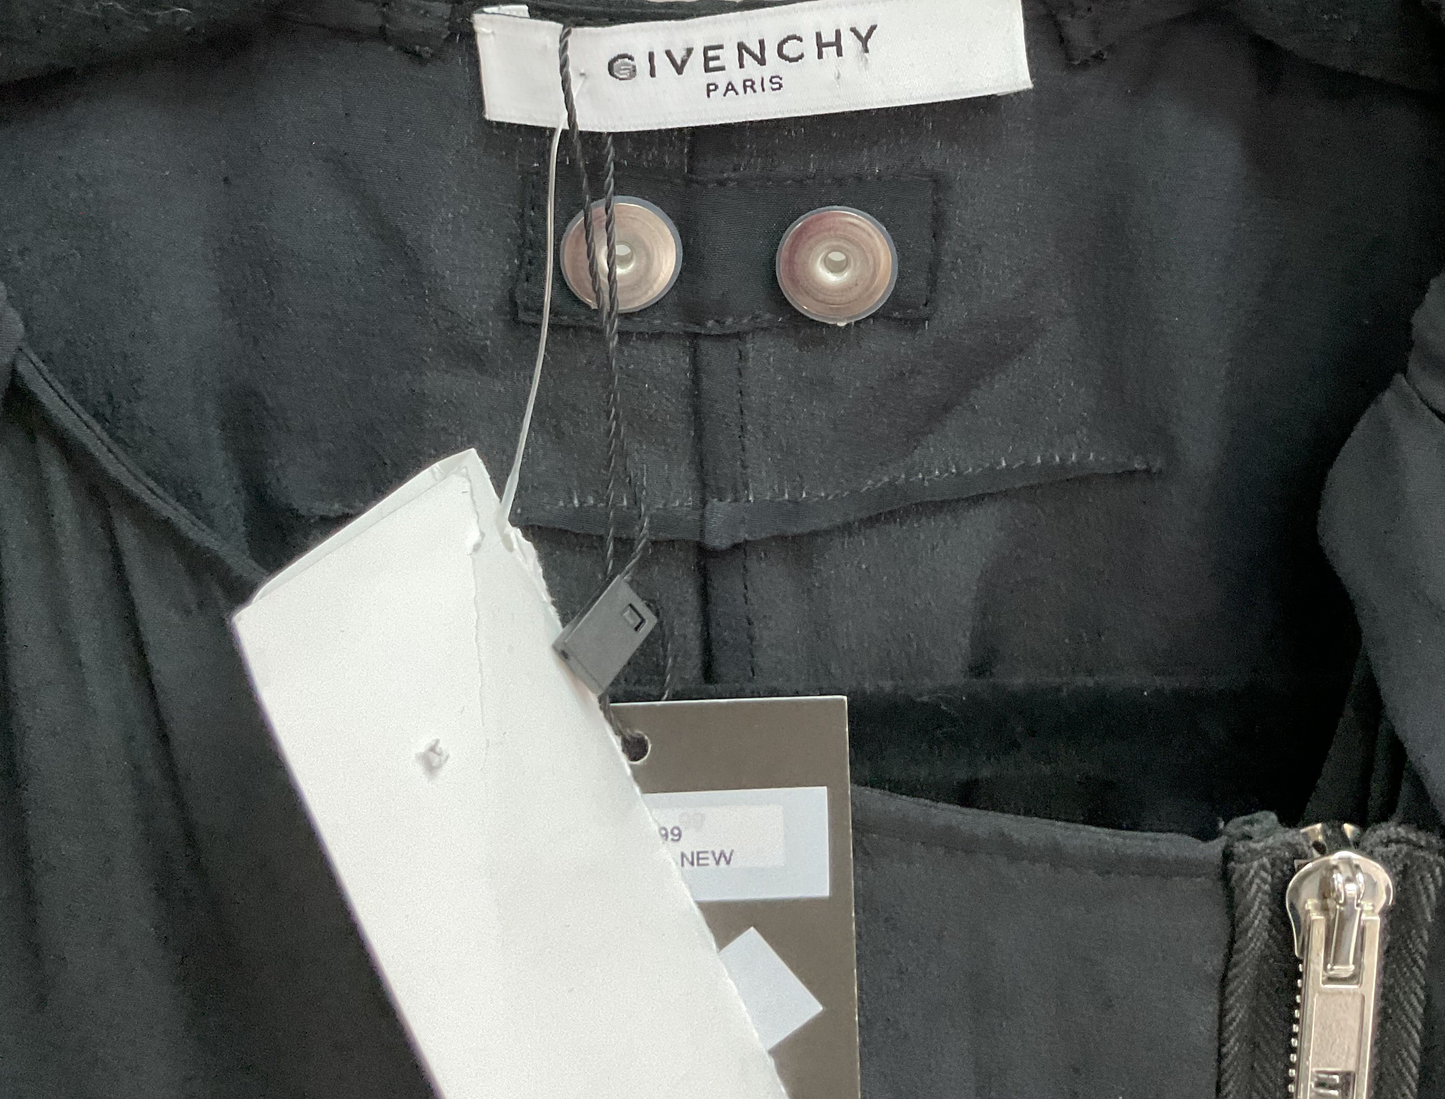 GIVENCHY Silk Asymmetric Zip-up Top w/ Tags